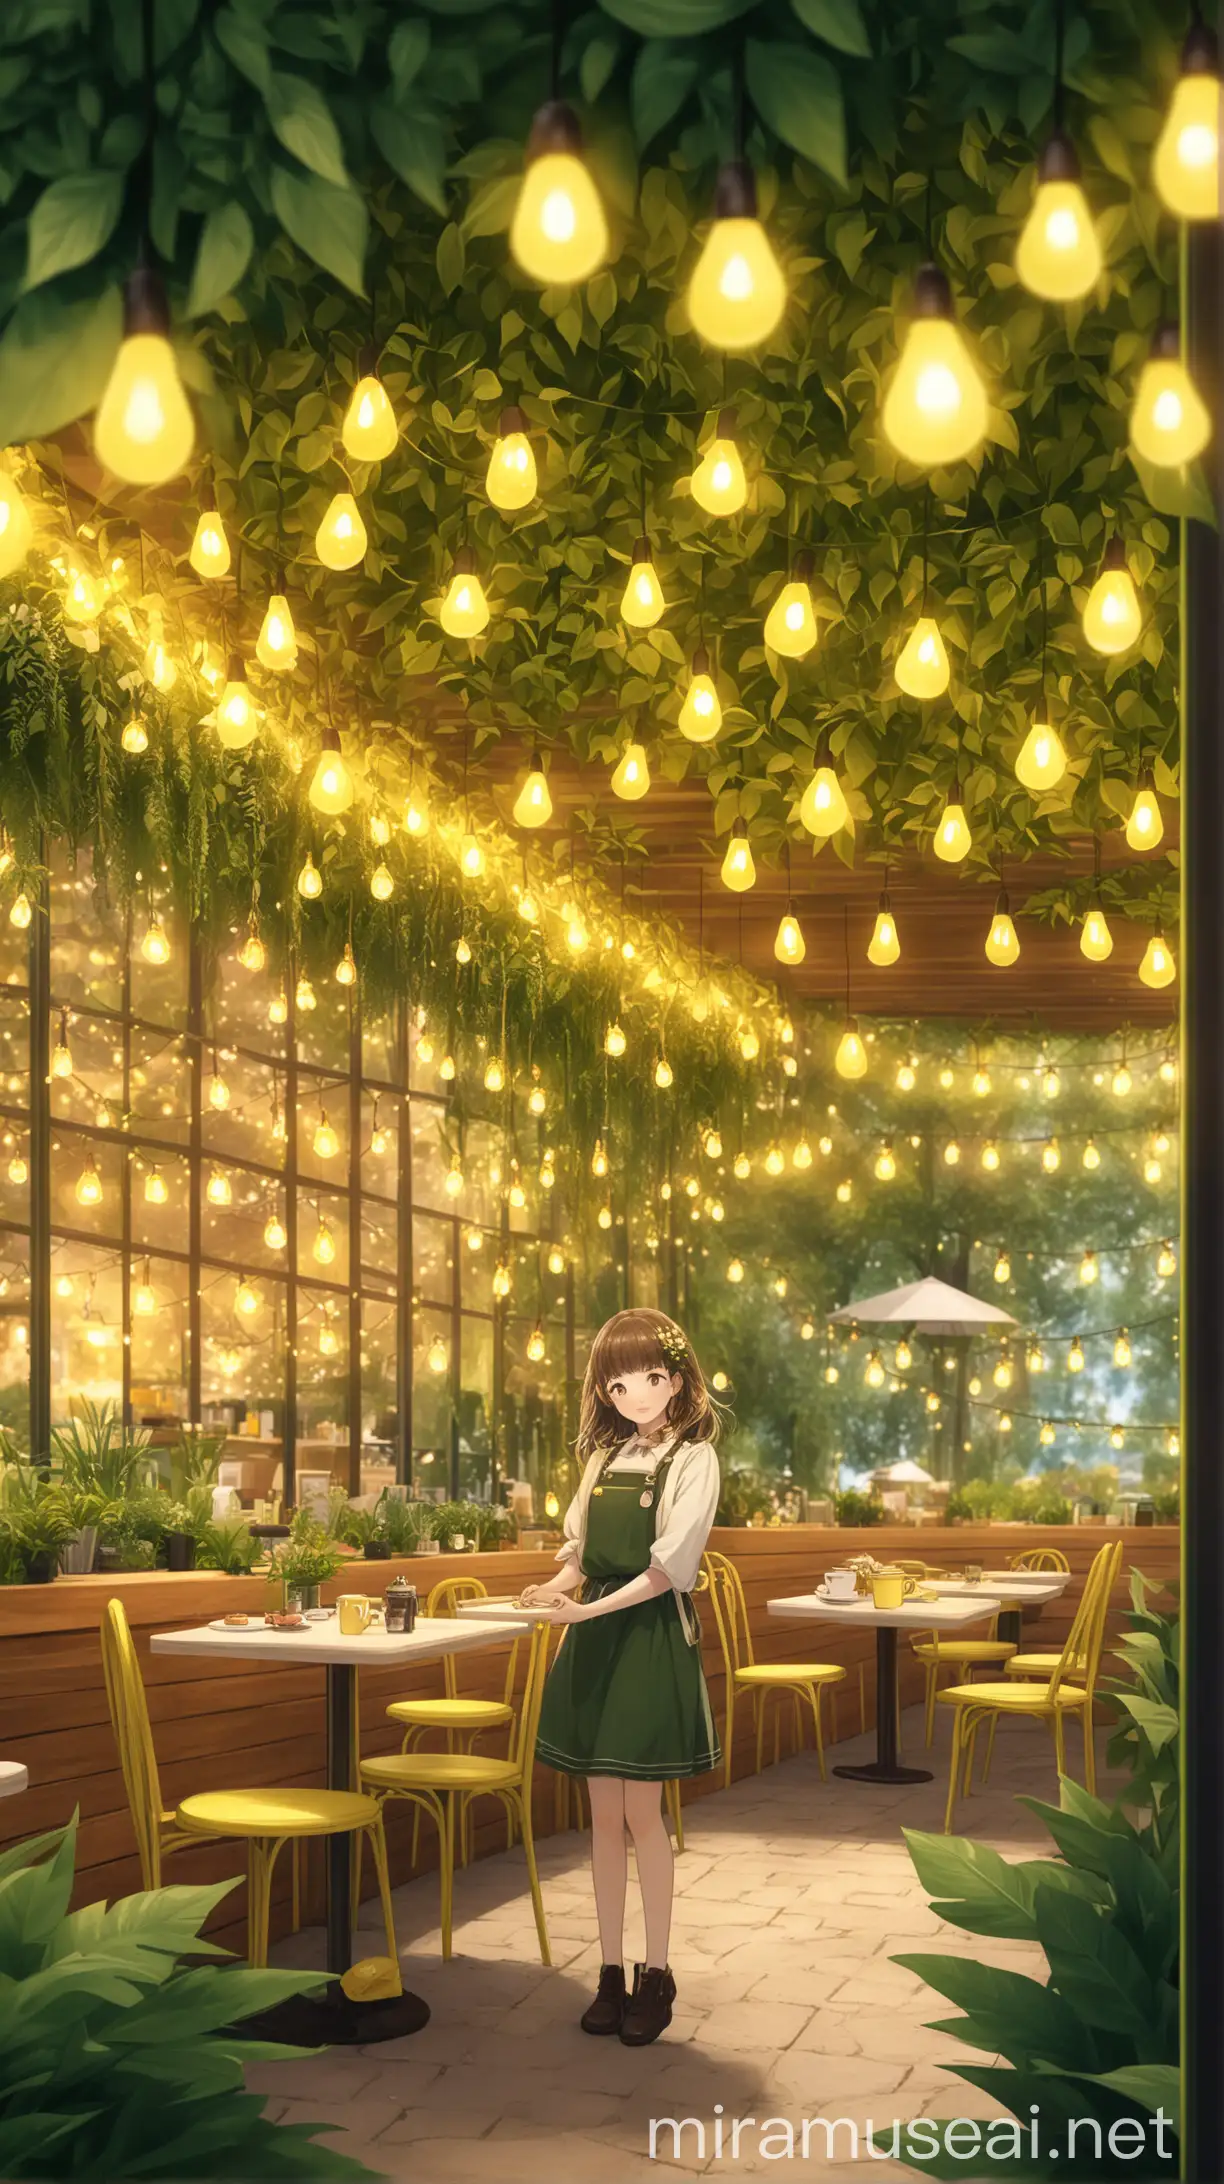 cute girl, outside in a nature field with a garden café, adorned with yellow decorative lights and hanging foliage, 